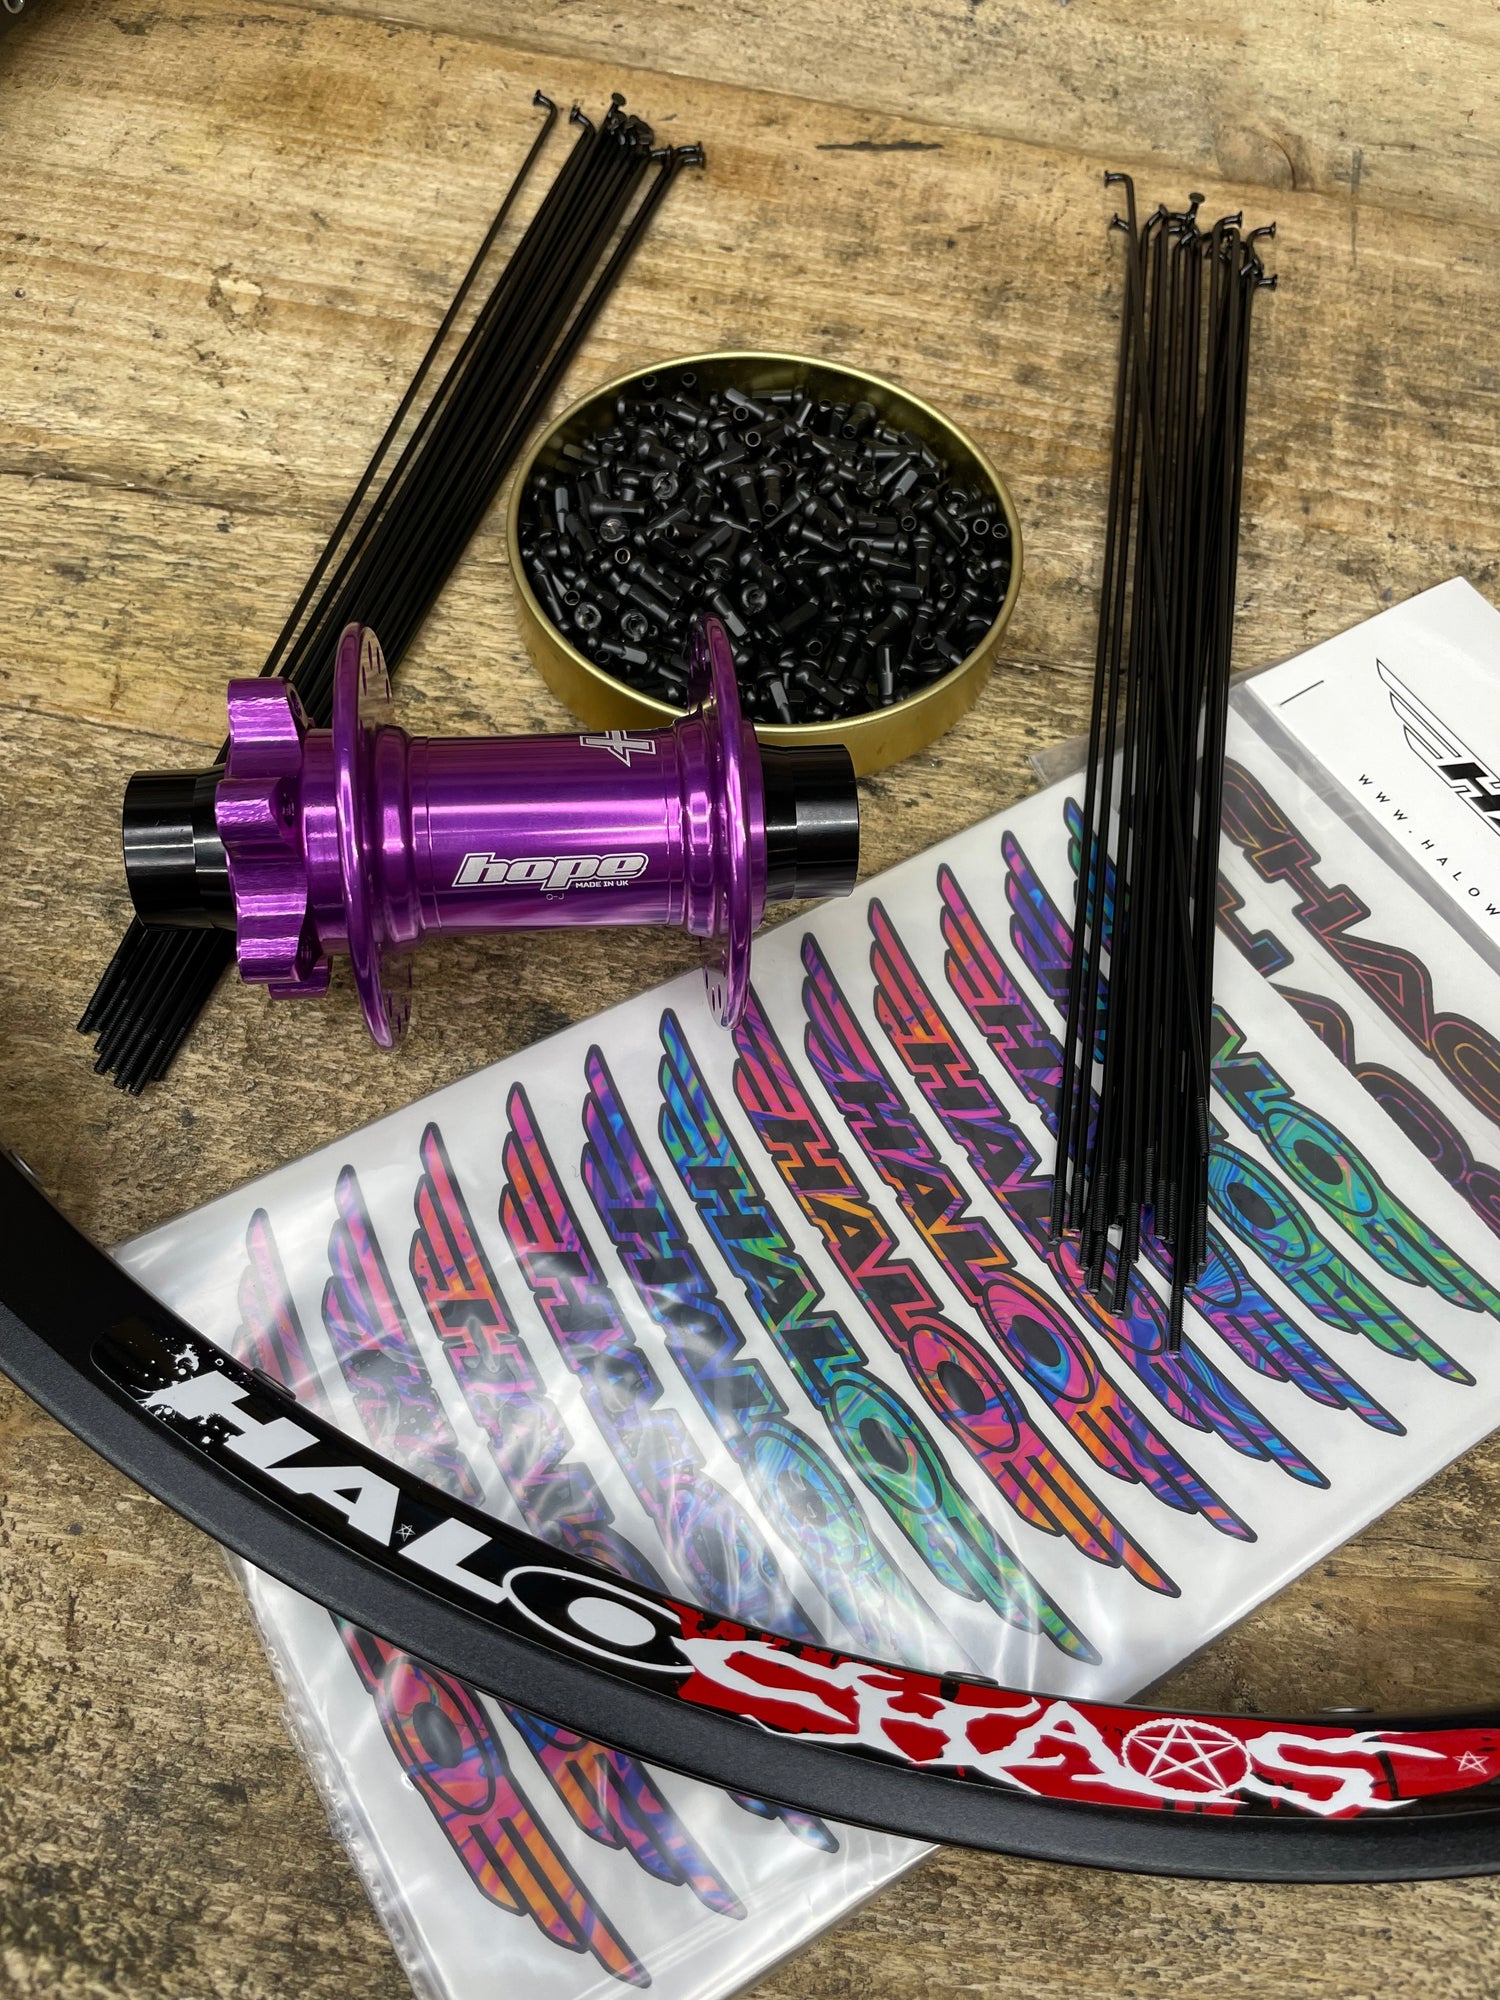 Slam69built Custom wheels with Halo Chaos Purple hubs and oil slick decals